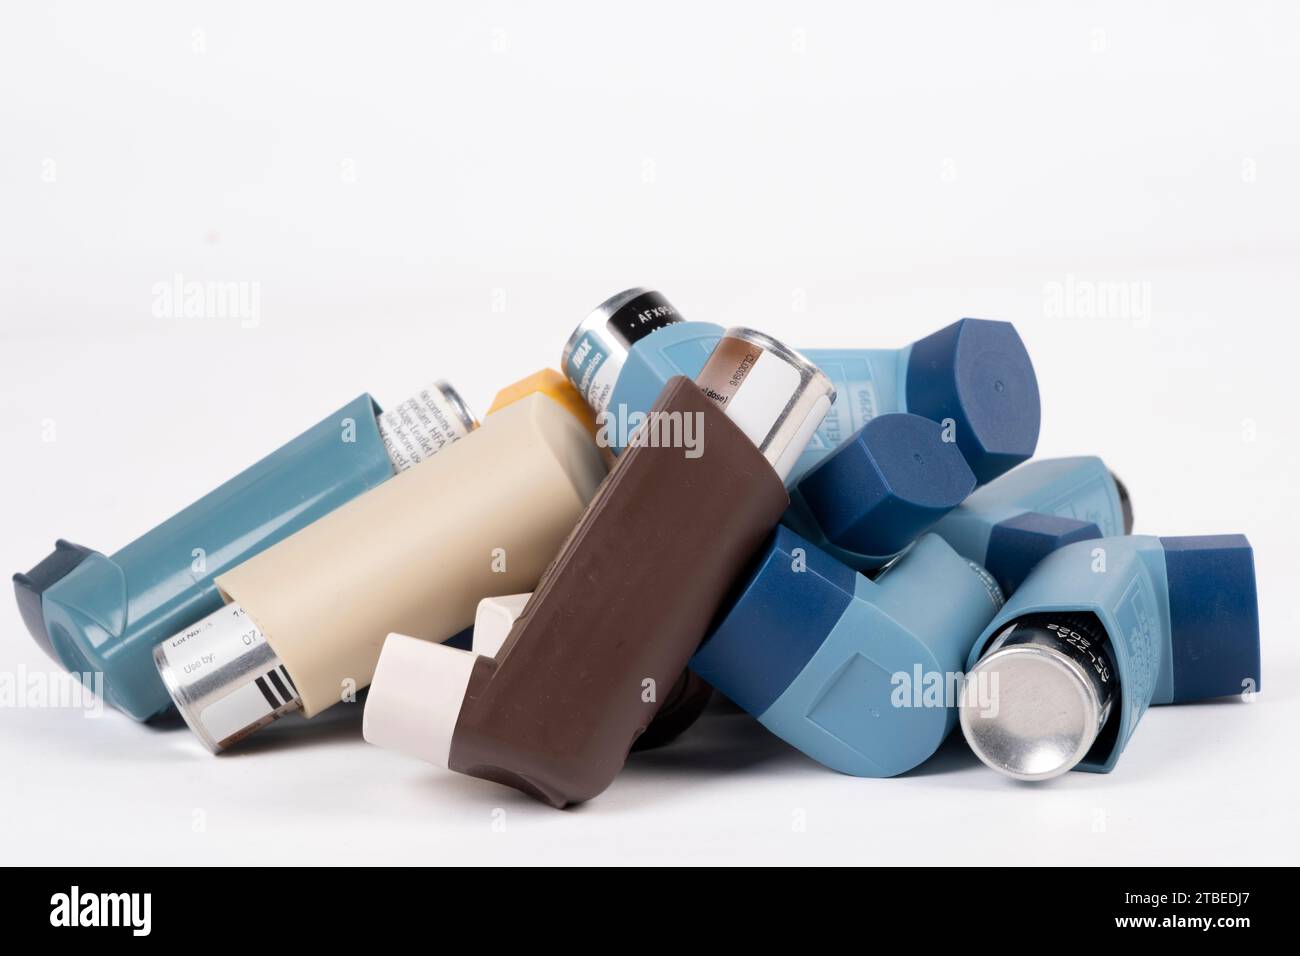 Pile of MDI (metered dosage inhalers) asthma inhalers considered undesirable for the environment and being replaced by DPI (dry powder inhaler) Stock Photo